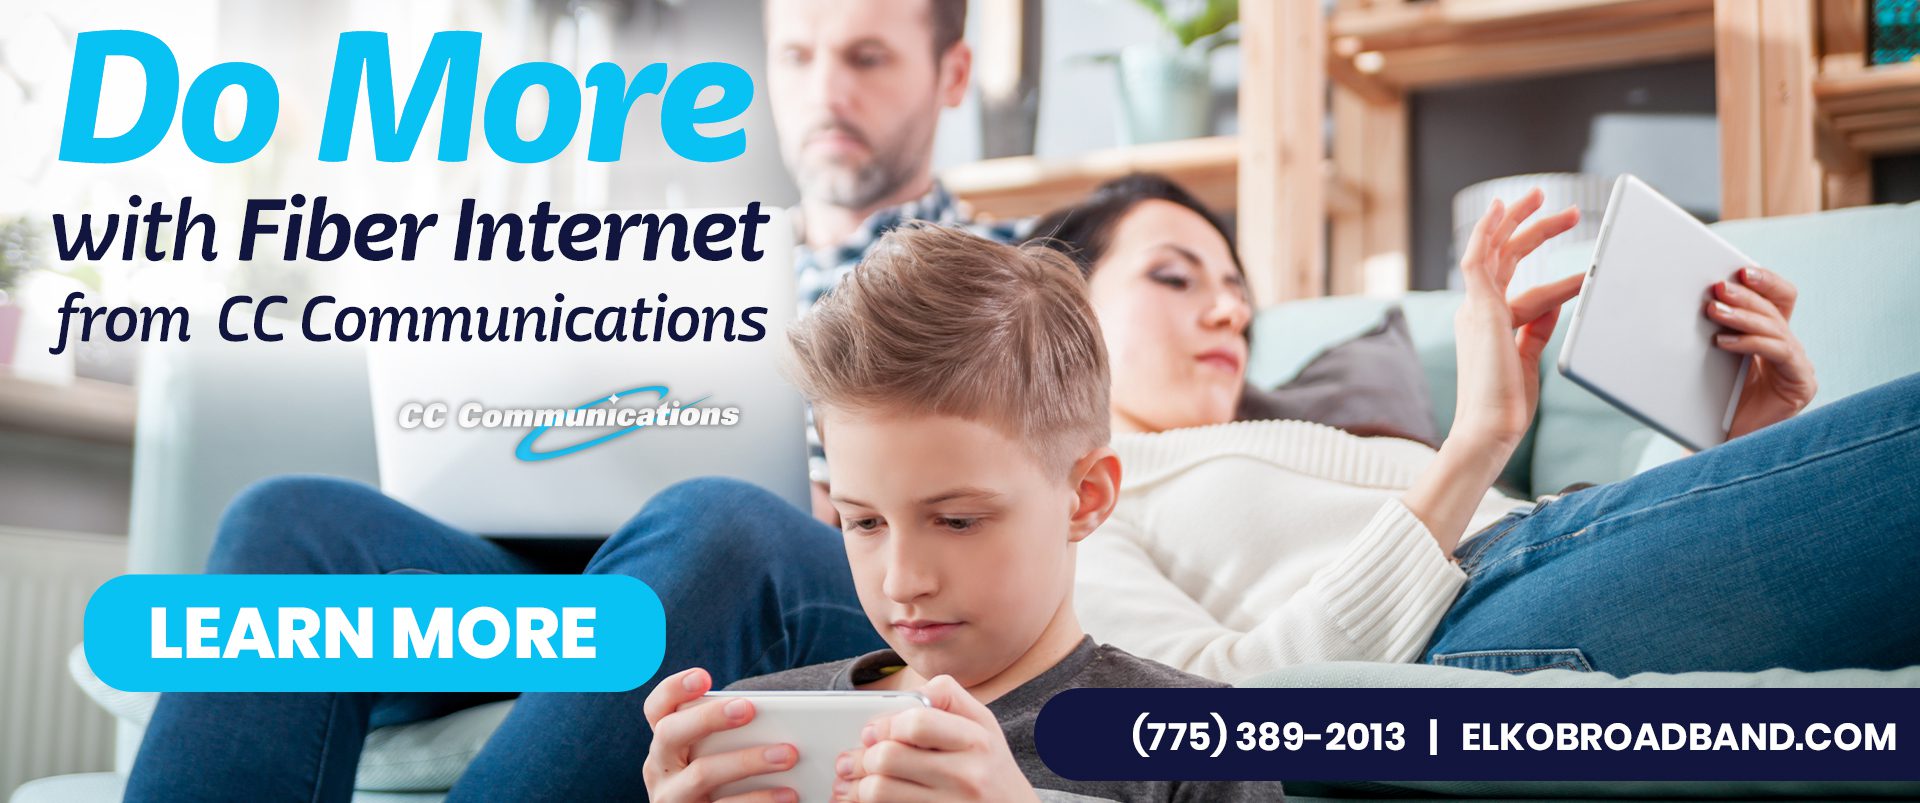 Do more with Fiber Internet from CC Communications banner.